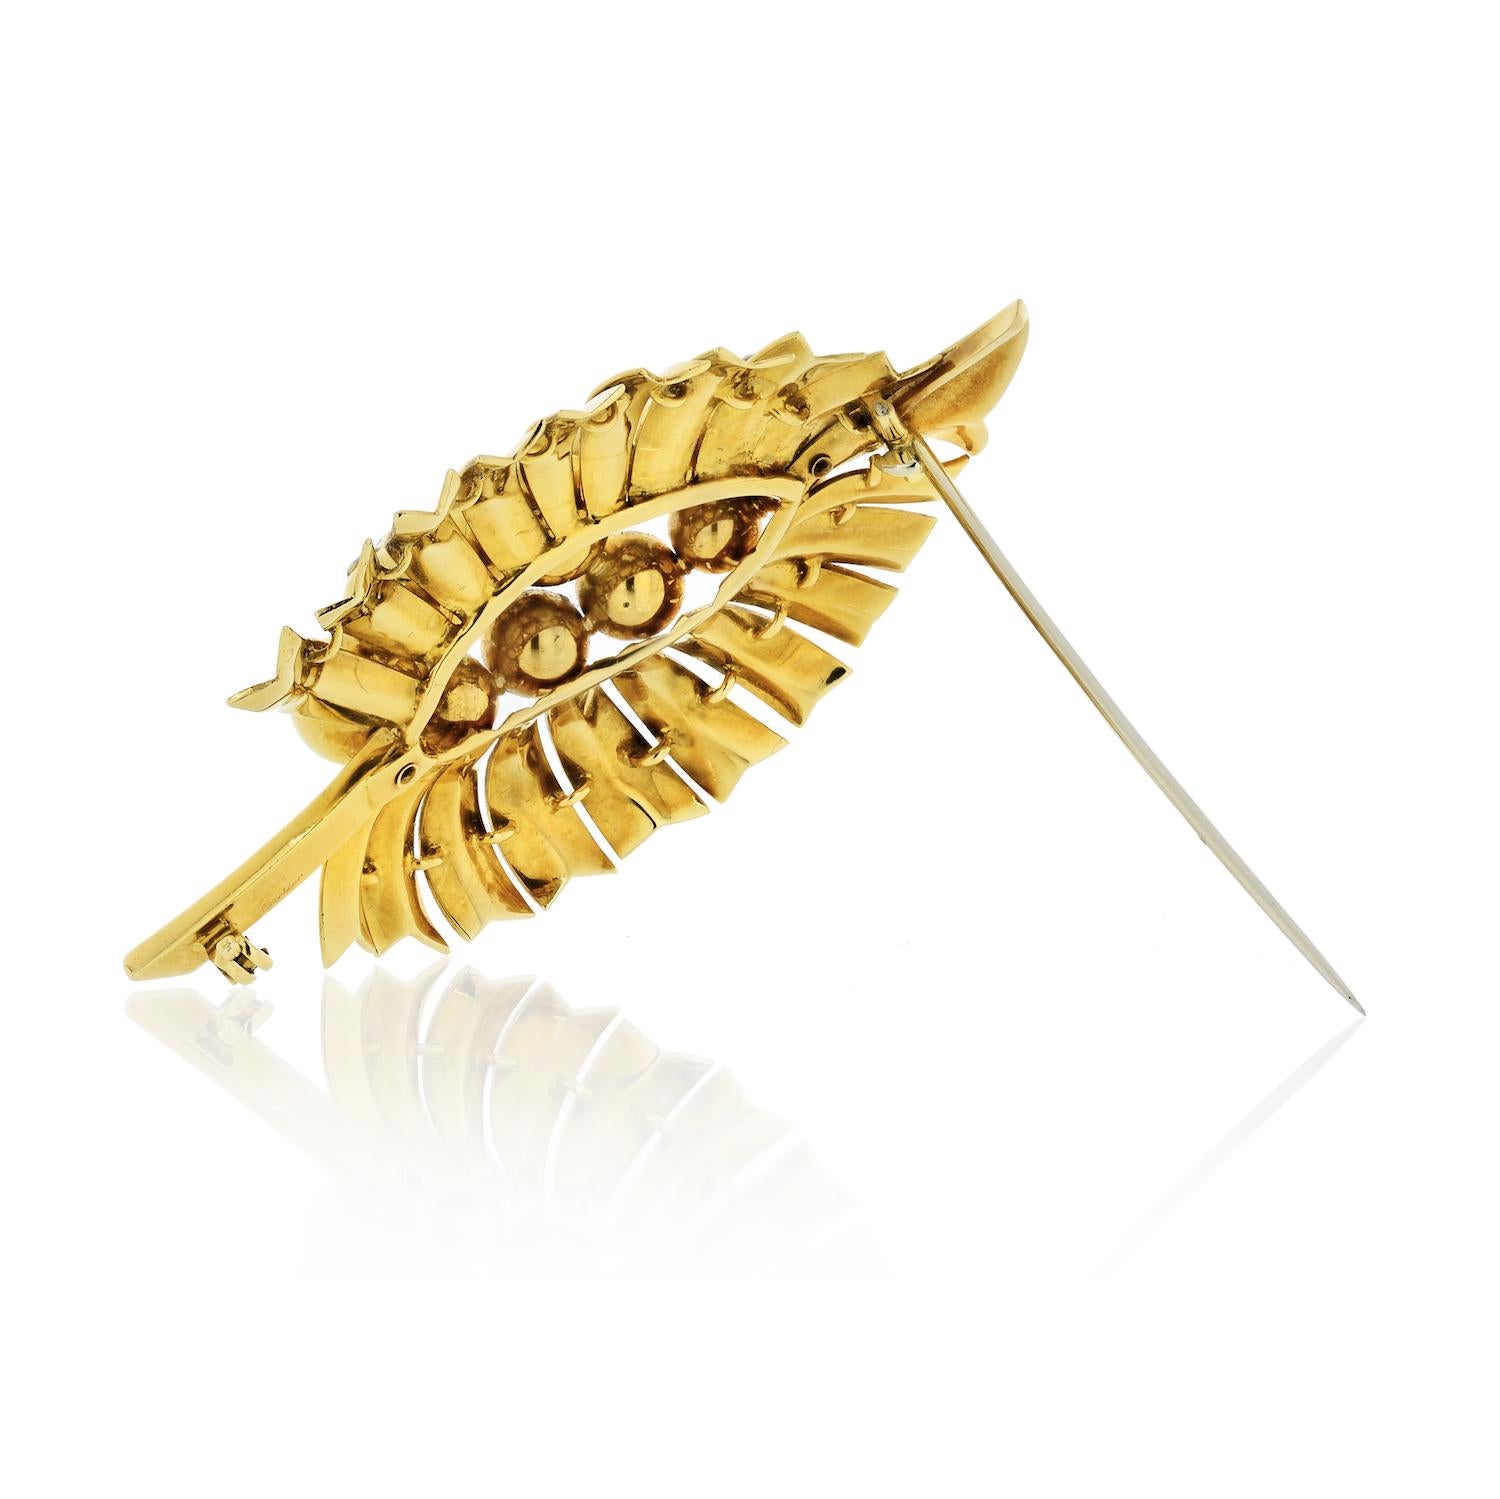 The Cartier 18k yellow gold diamond vintage brooch shaped in the form of a leaf is a stunning piece of jewelry that exudes elegance and sophistication. Crafted from high-quality 18k yellow gold, this brooch features a beautiful leaf design with